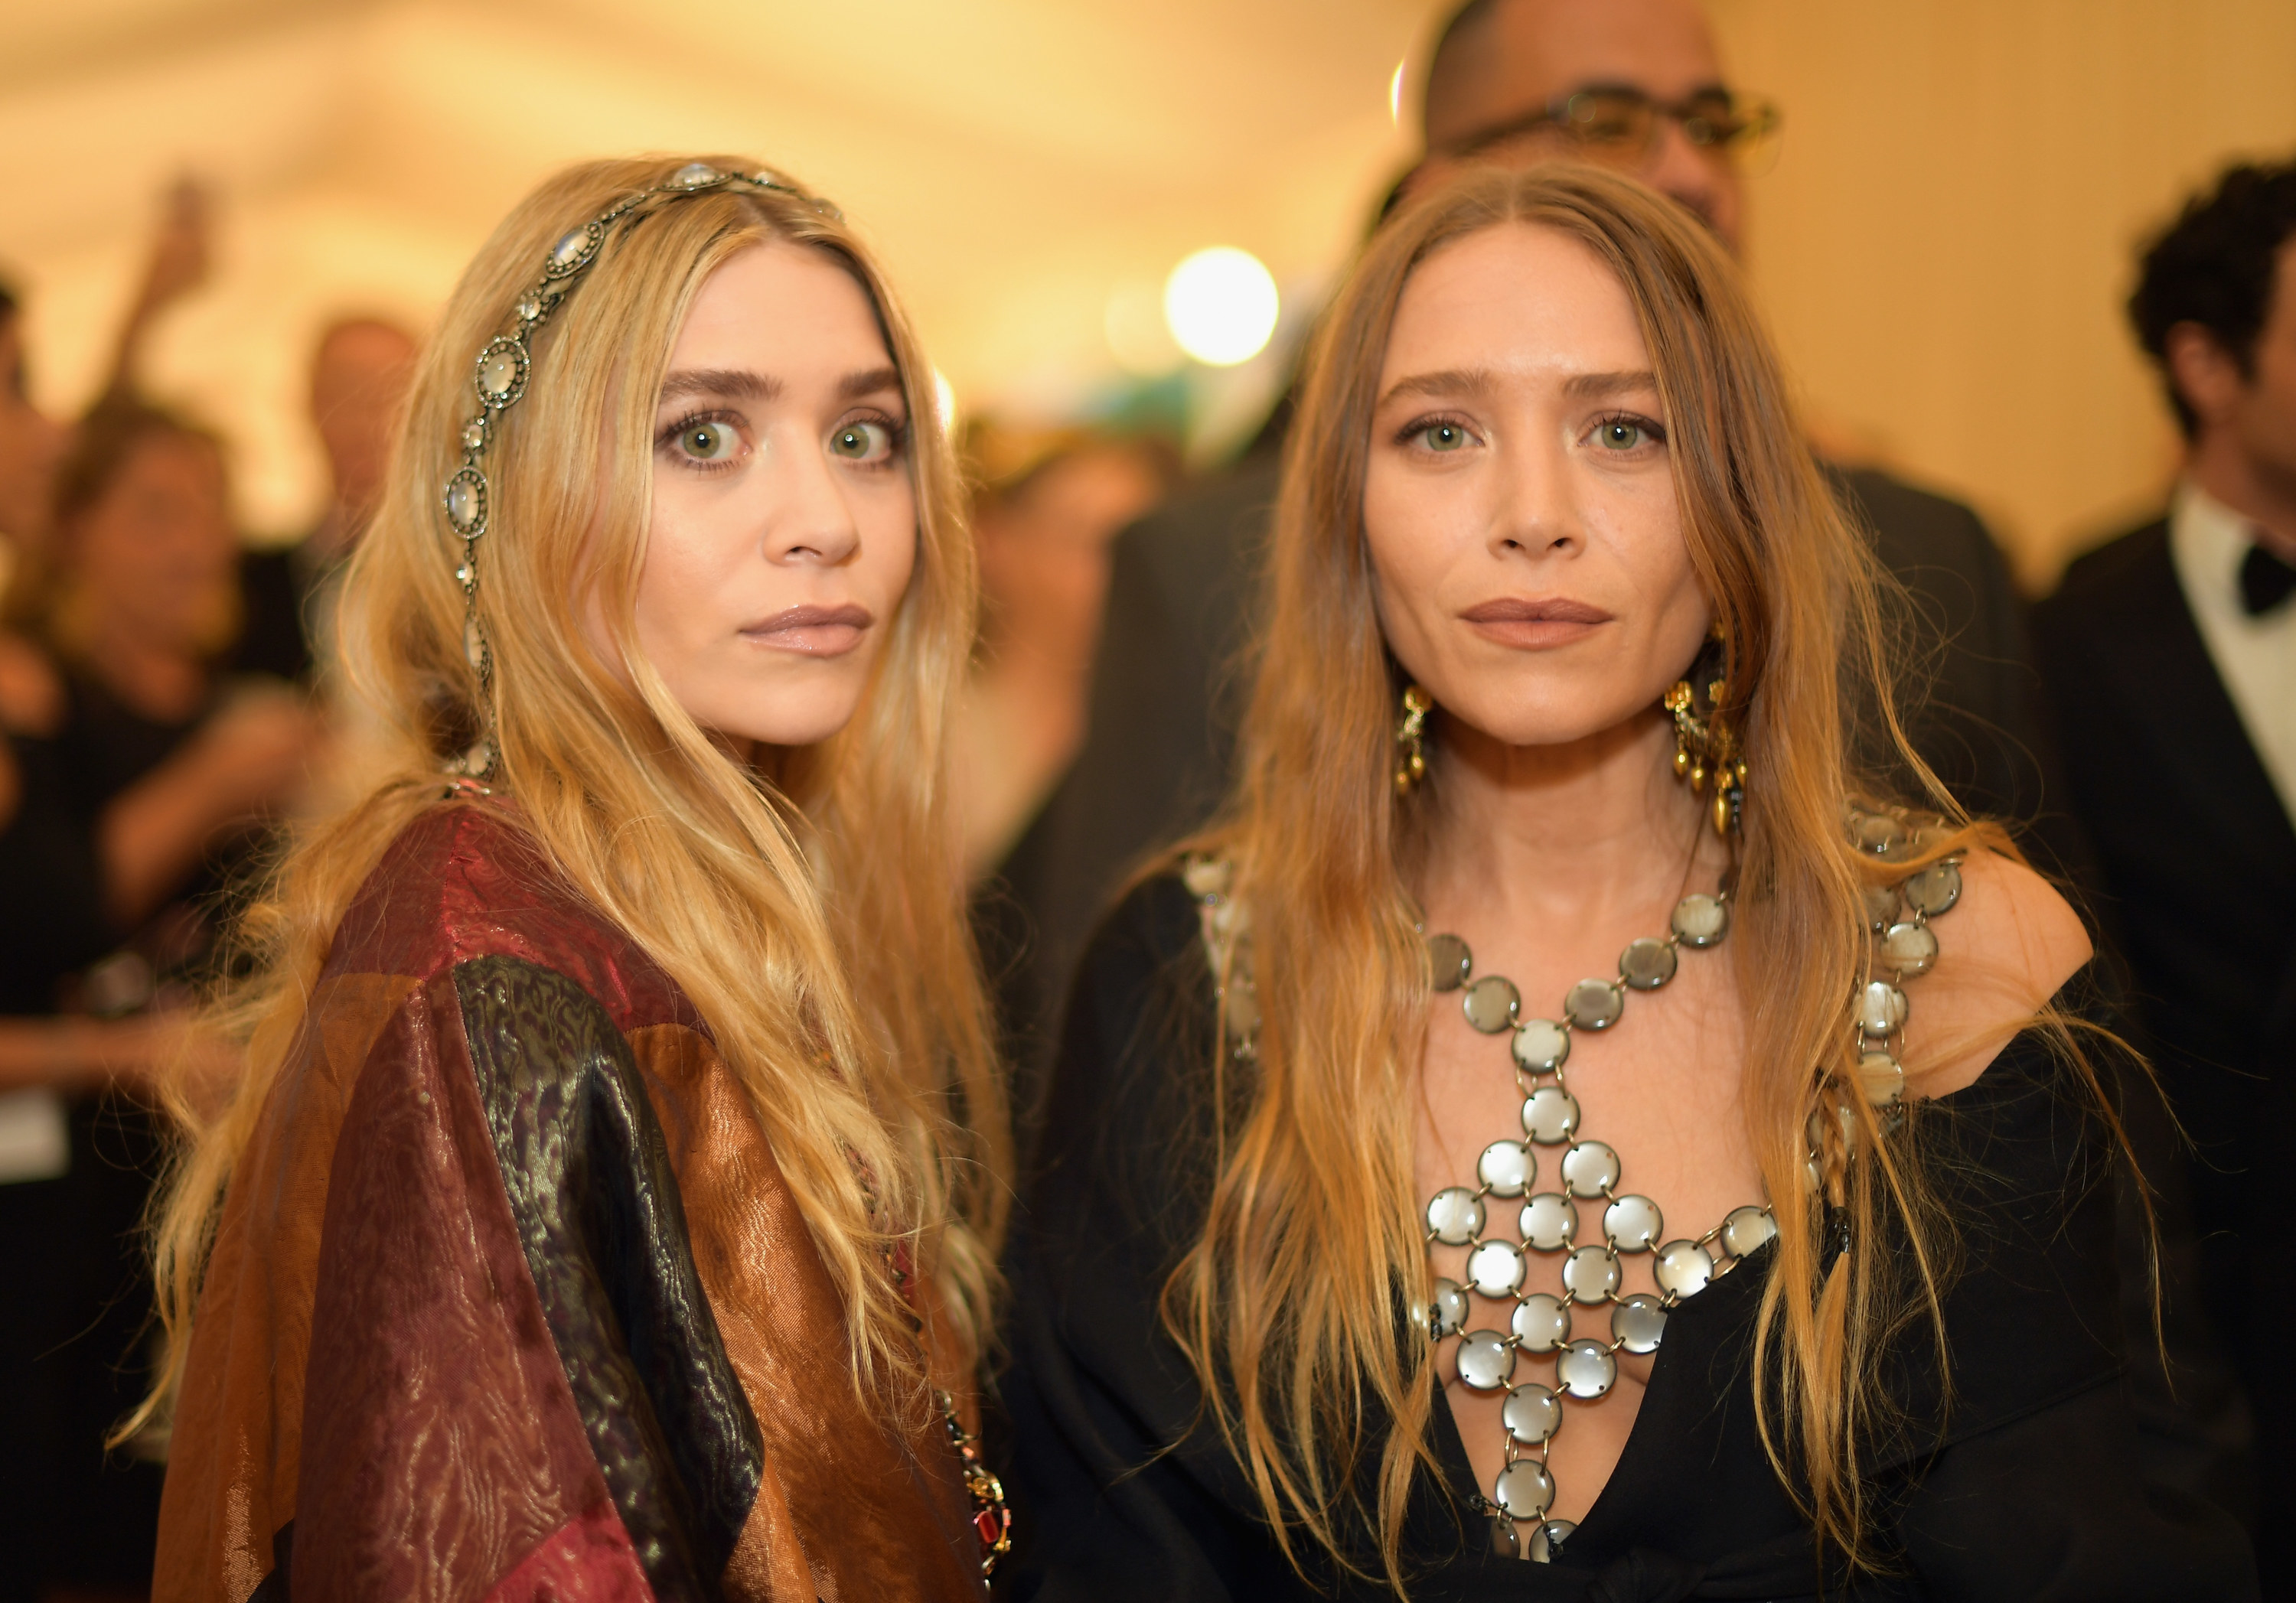 Ashley wearing a medallion style head band with a bohemian style dress, next to Mary Kate with a chest piece made of circular beads with a black dress